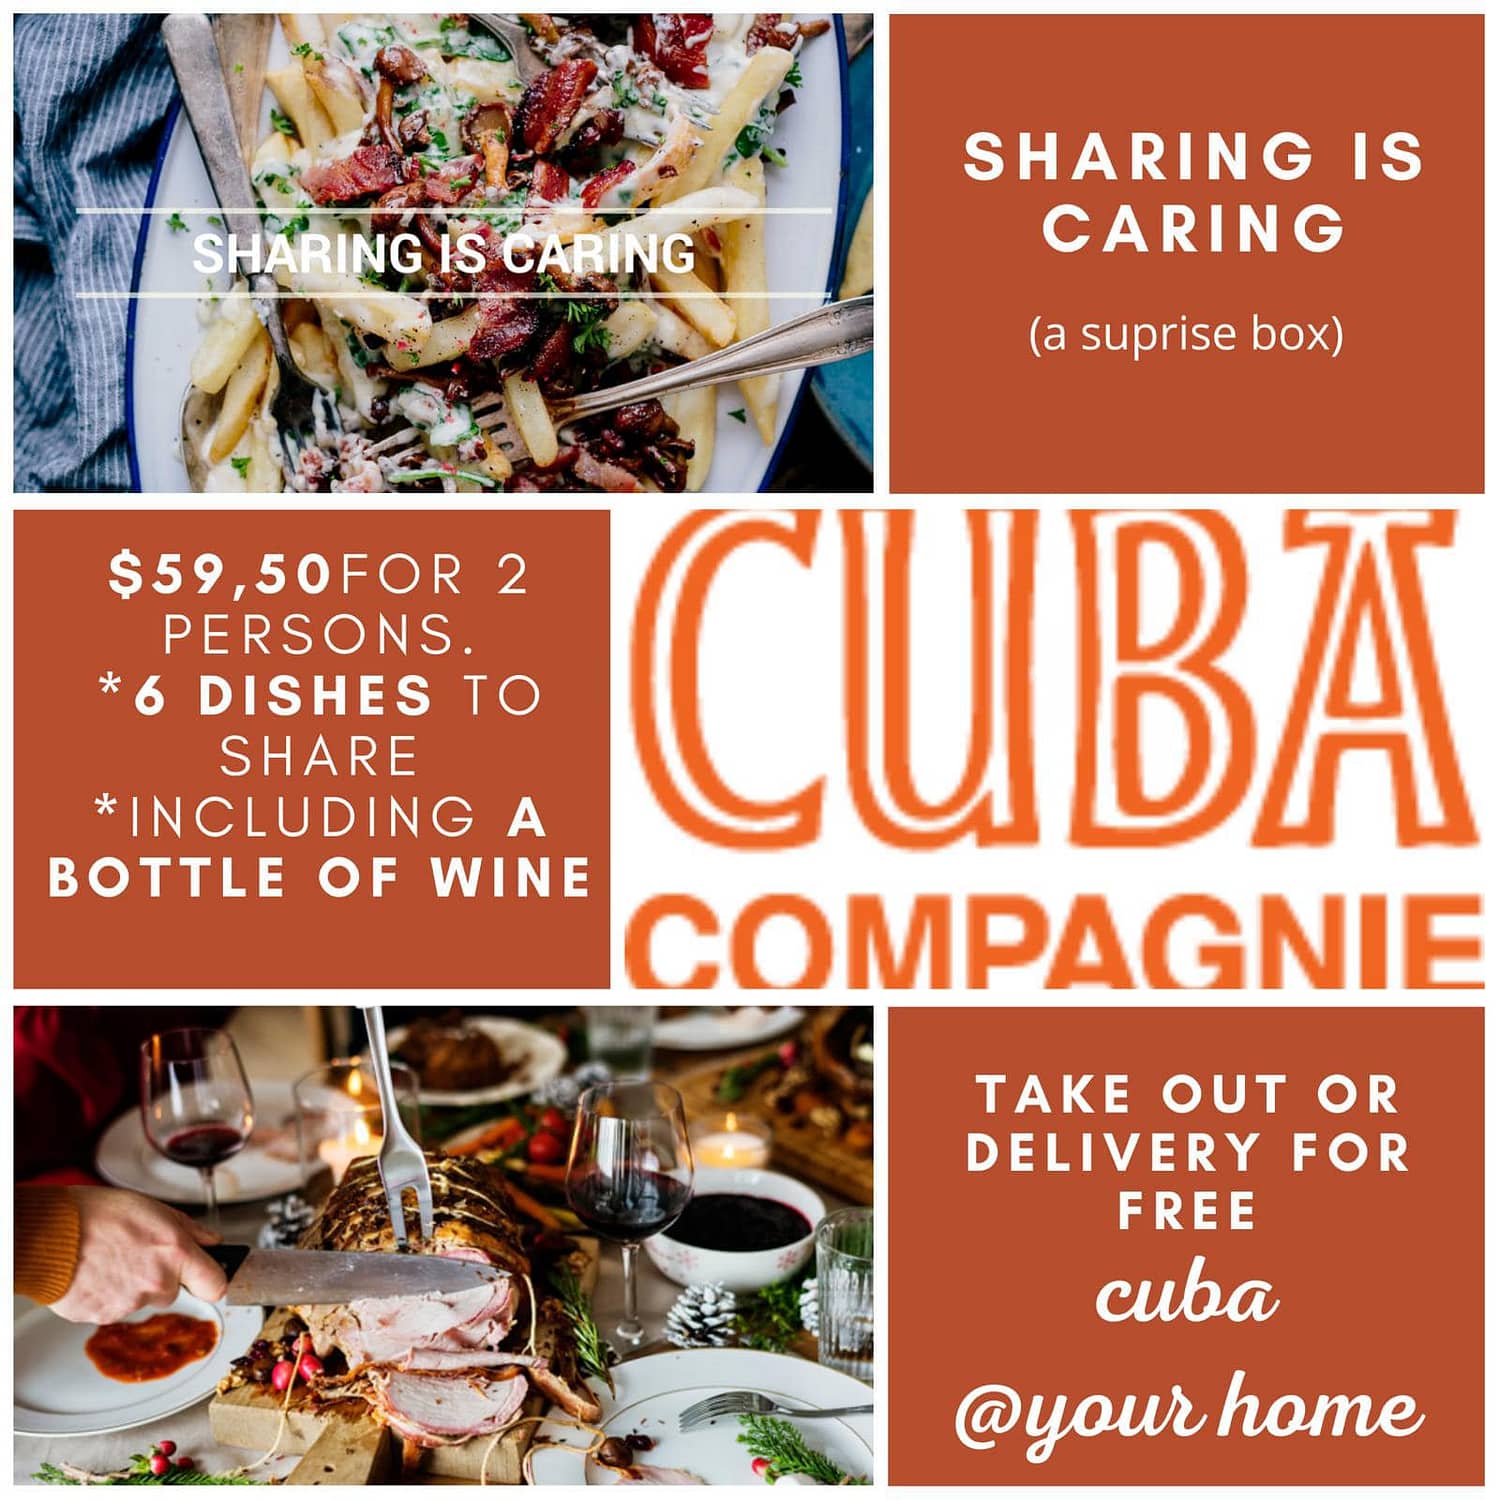 cuba sharing is caring